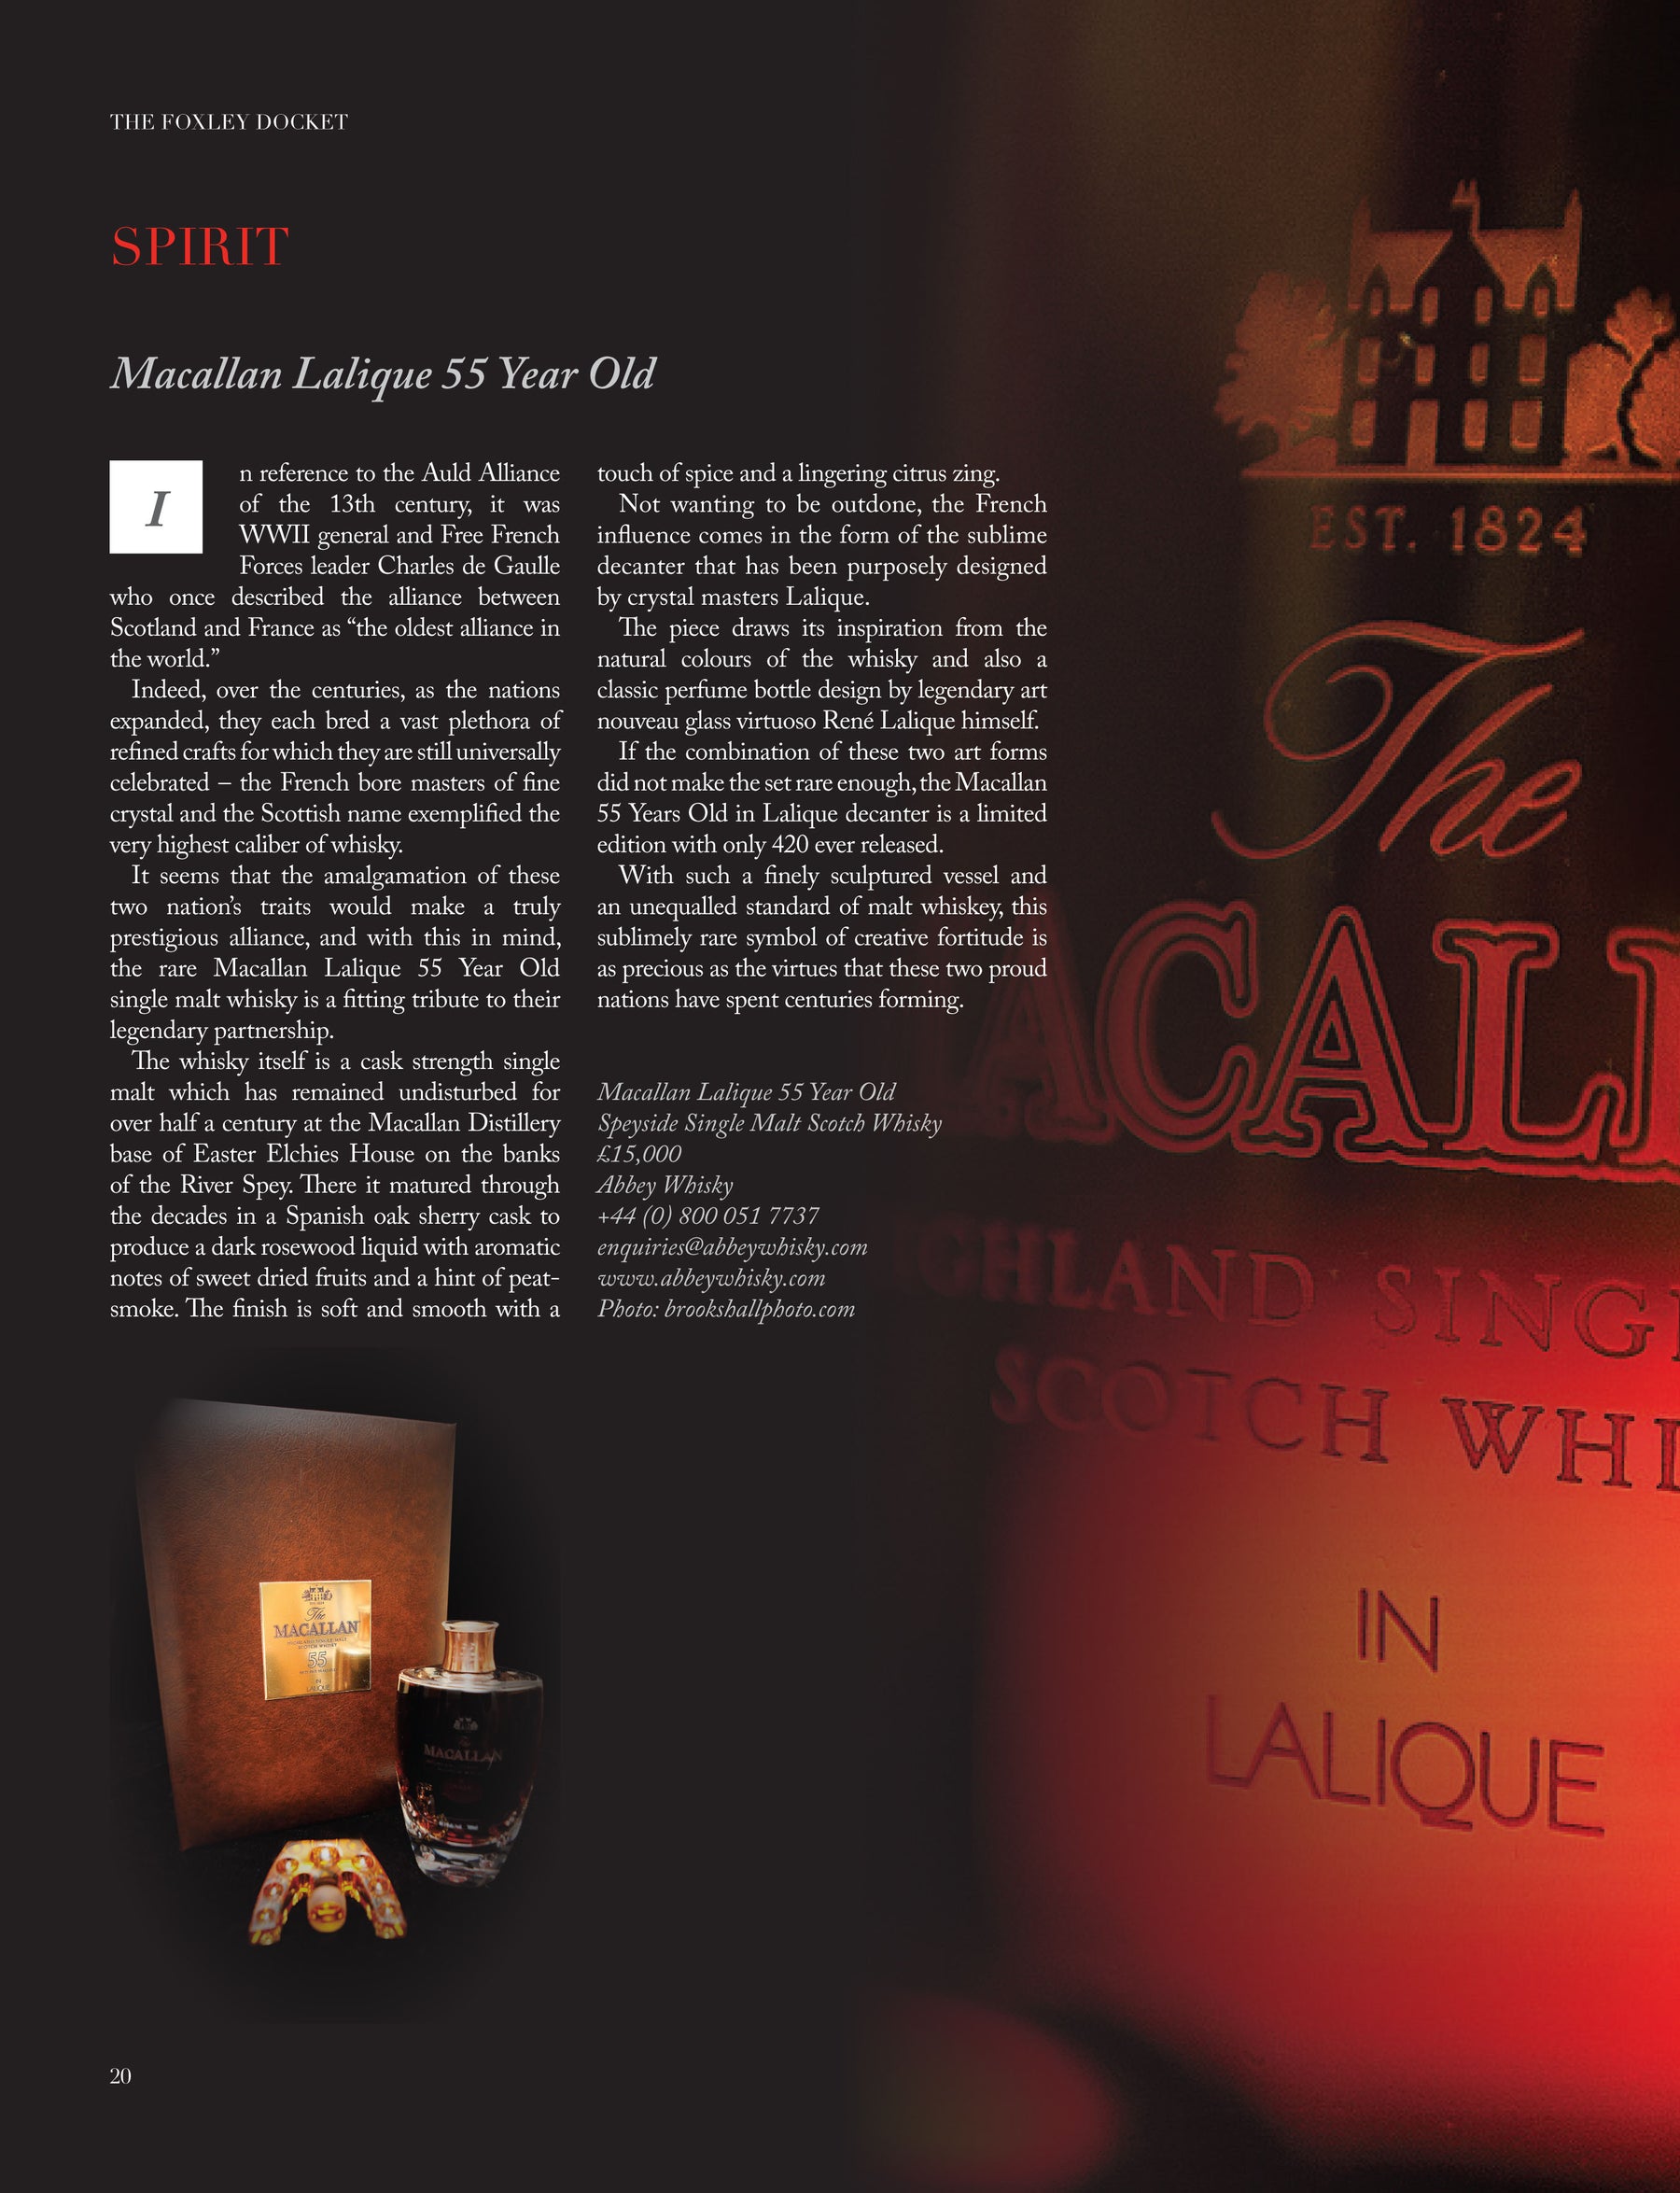 Macallan 55 Year Old Lalique - The Foxley Docket